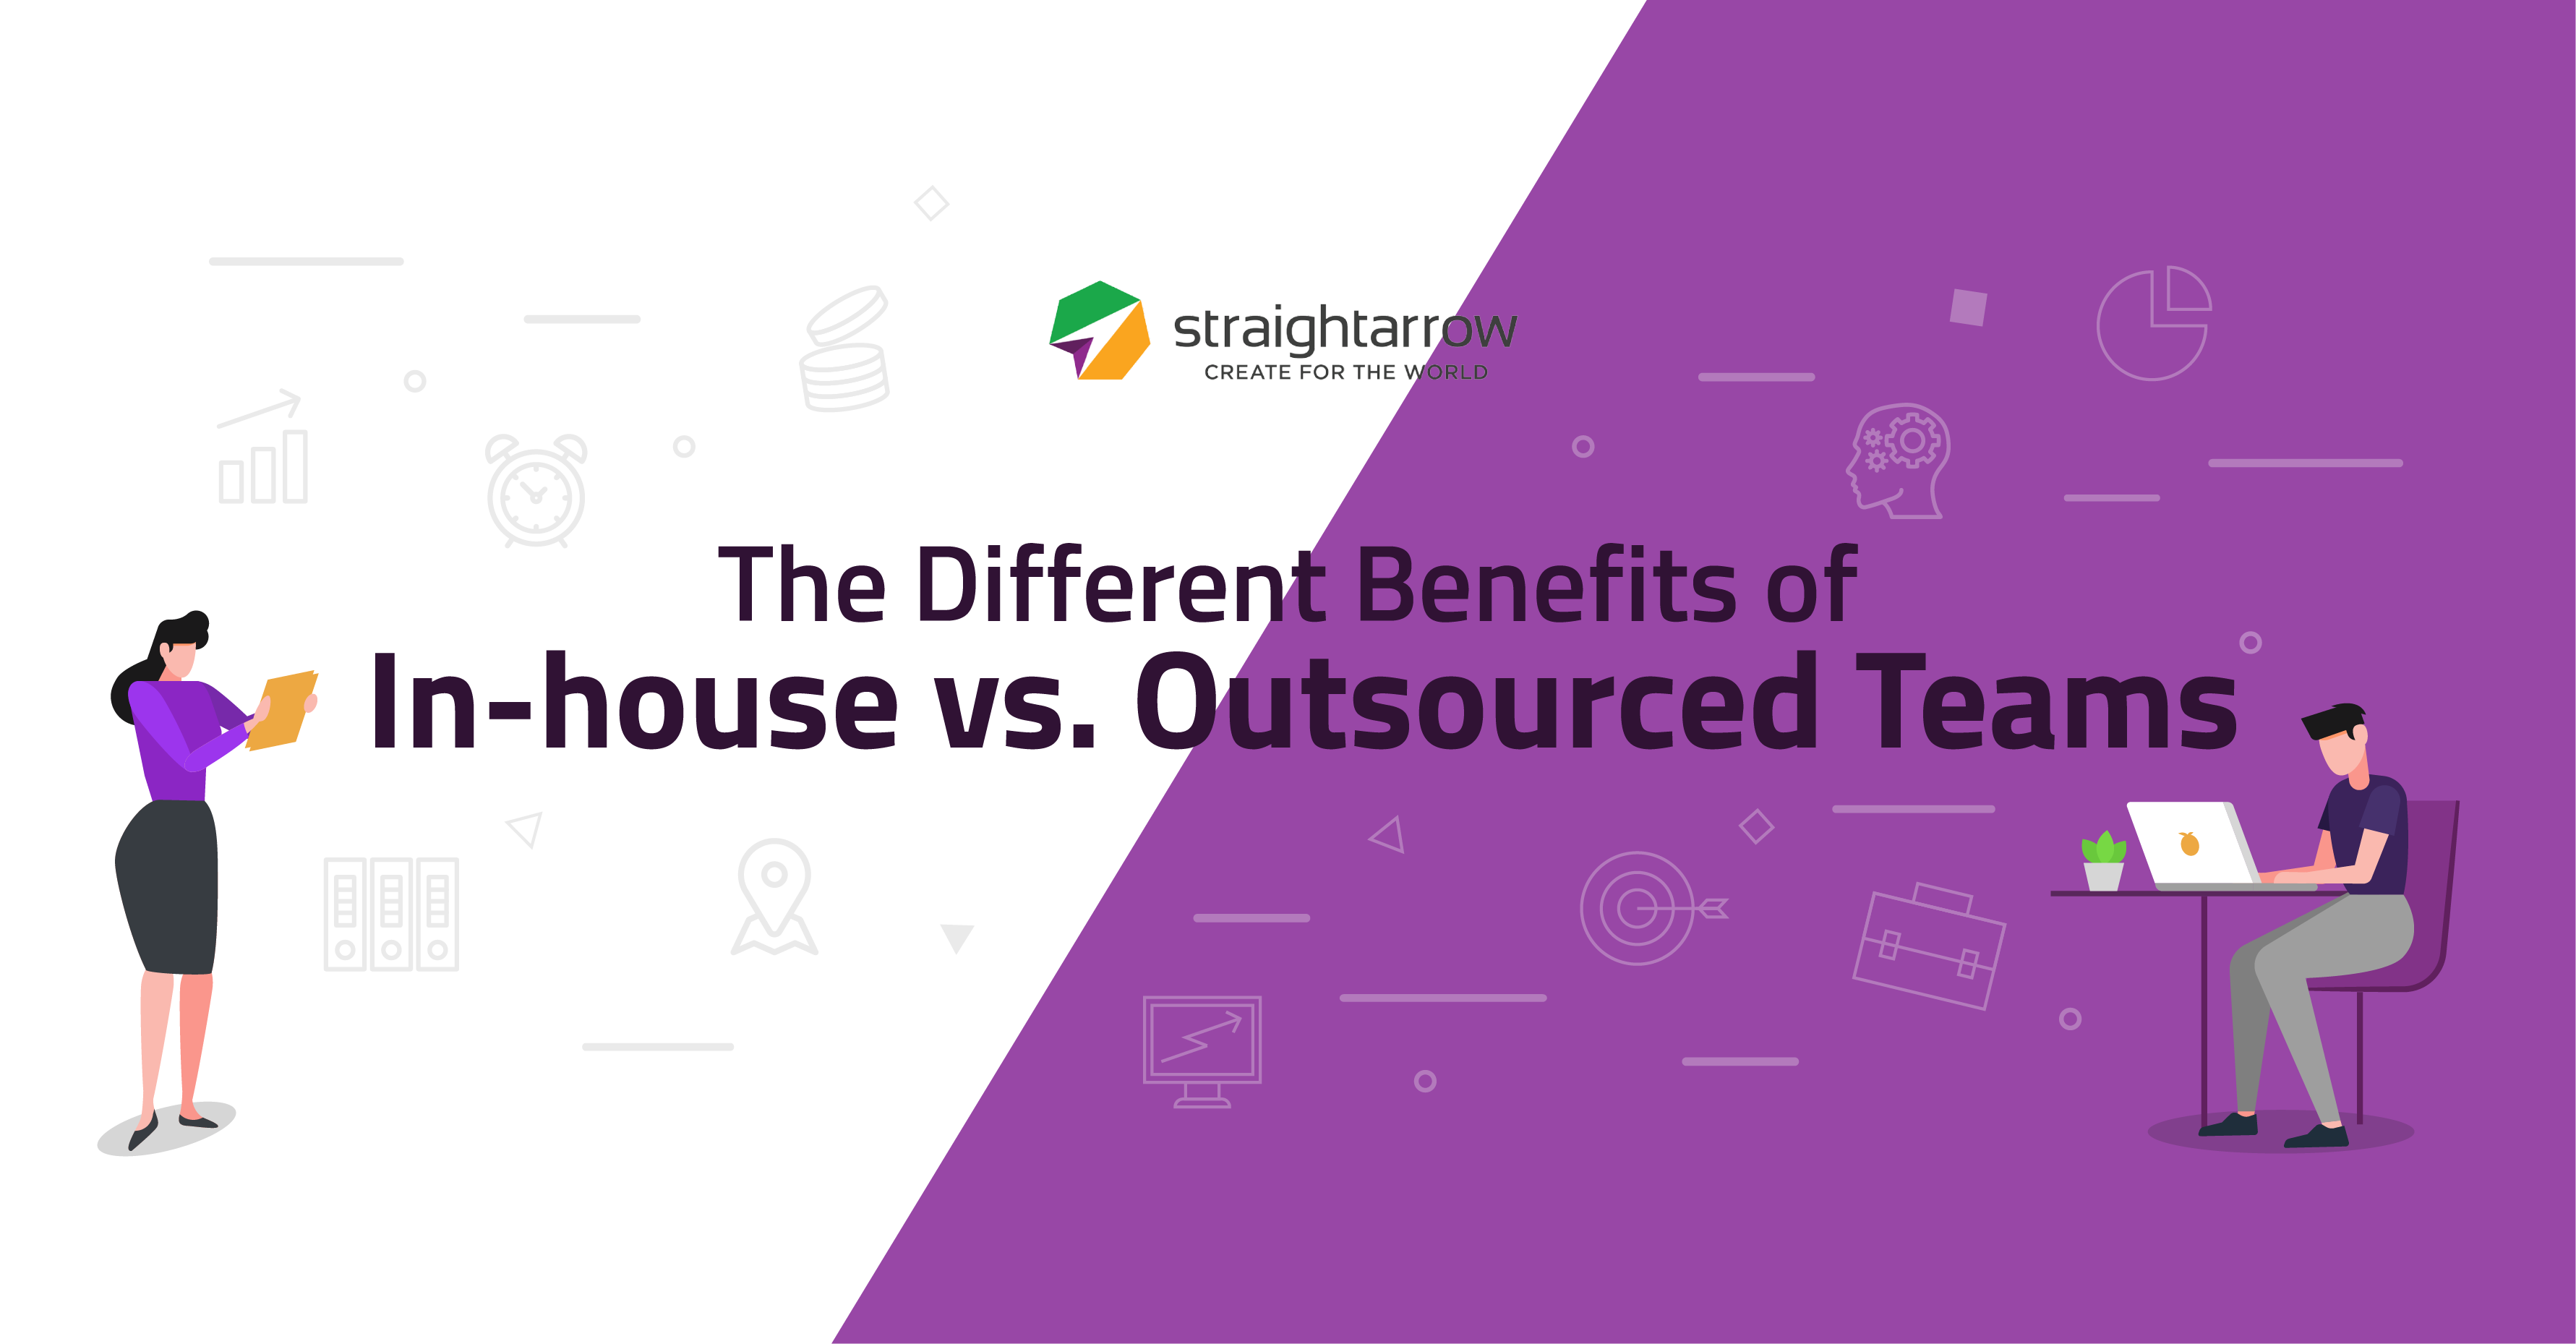 4 Unique Benefits You Need to Know About Outsourced Teams